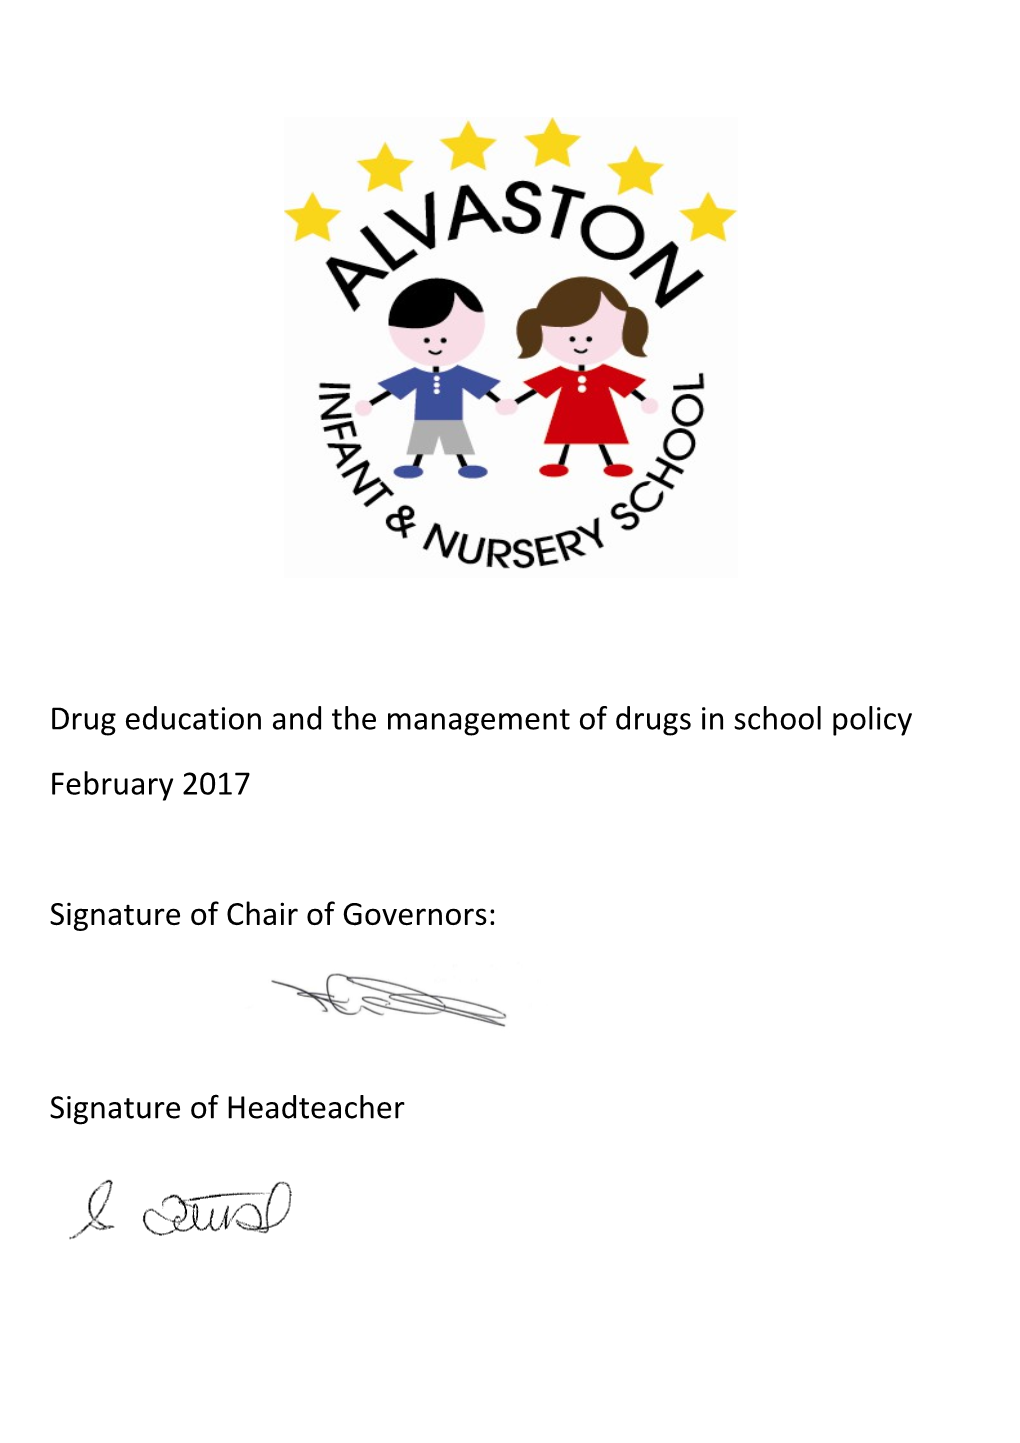 Drug Education and the Management of Drugs in School Policy